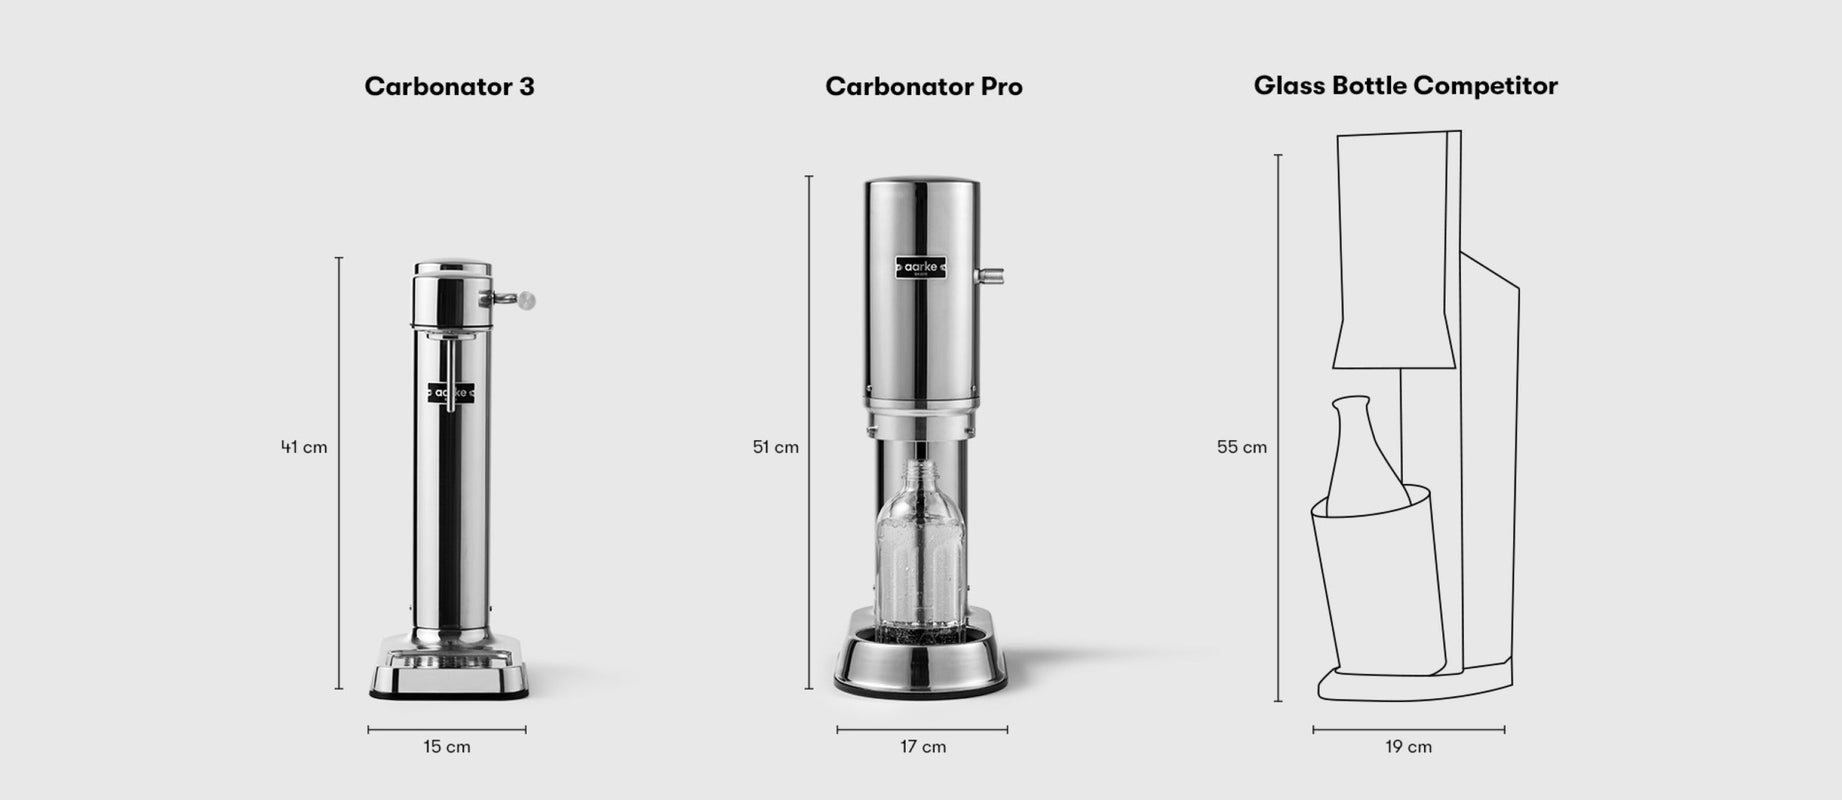 A size chart comparing the size of the Carbonator 3 and the Carbonator Pro.